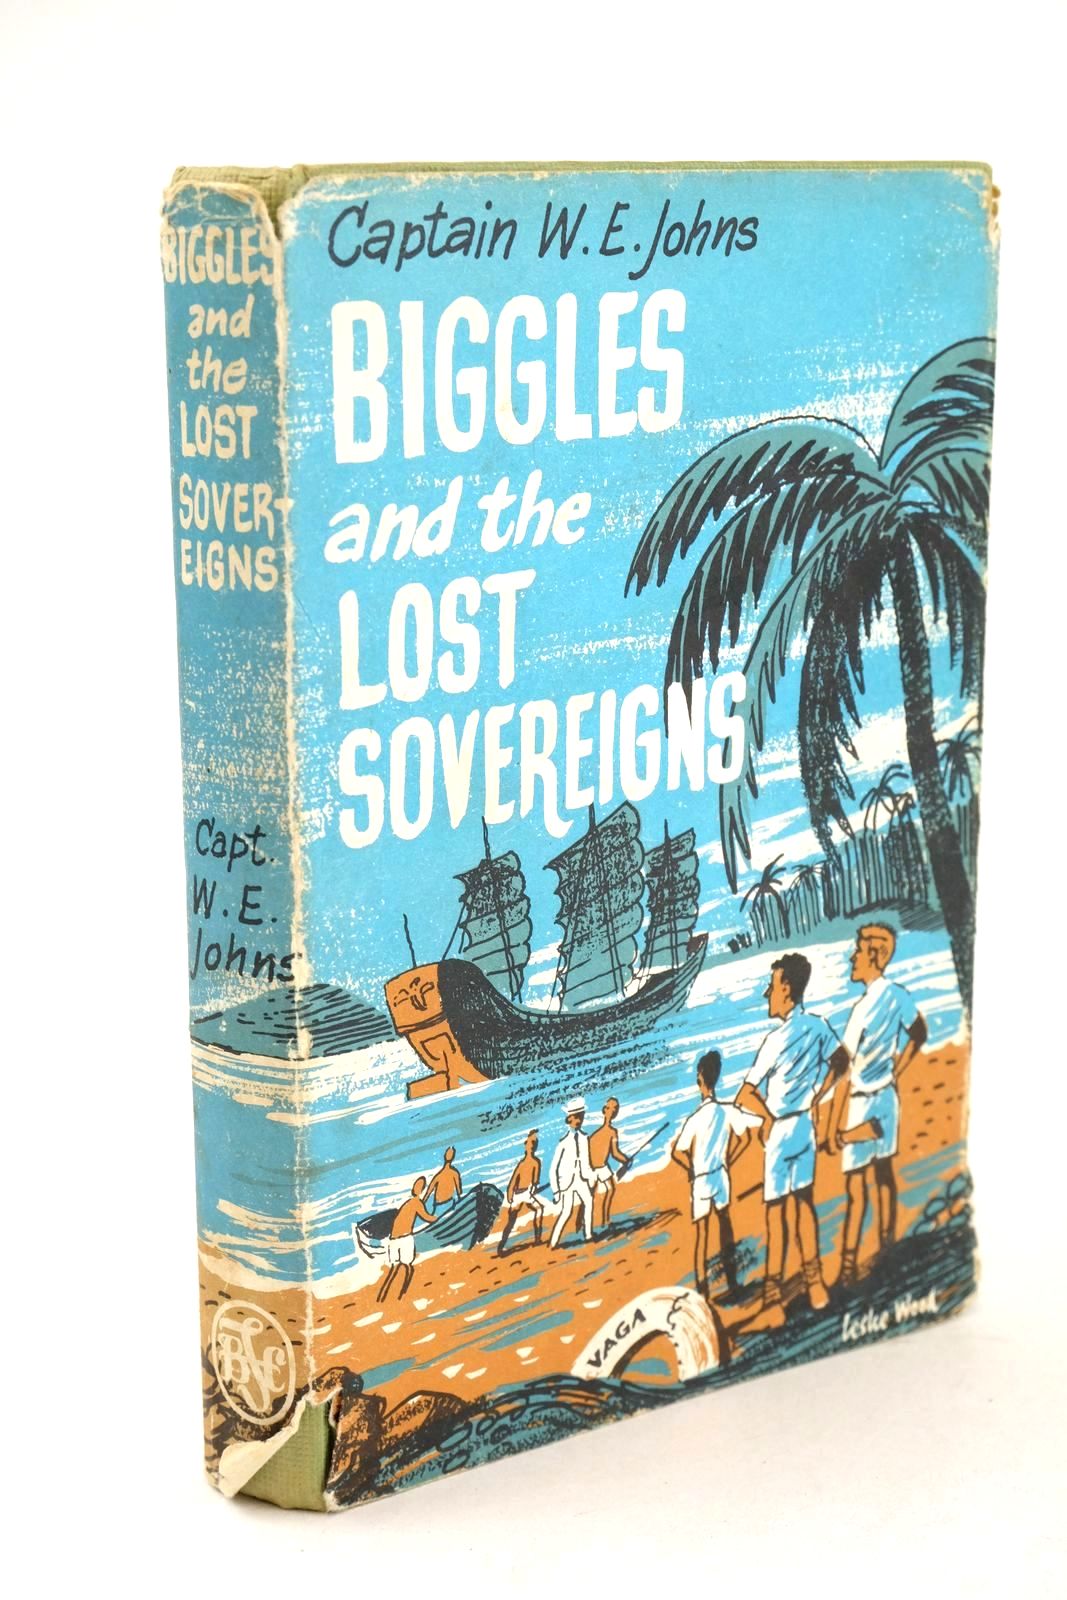 Photo of BIGGLES AND THE LOST SOVEREIGNS written by Johns, W.E. illustrated by Stead, Leslie published by The Children's Book Club (STOCK CODE: 1326030)  for sale by Stella & Rose's Books